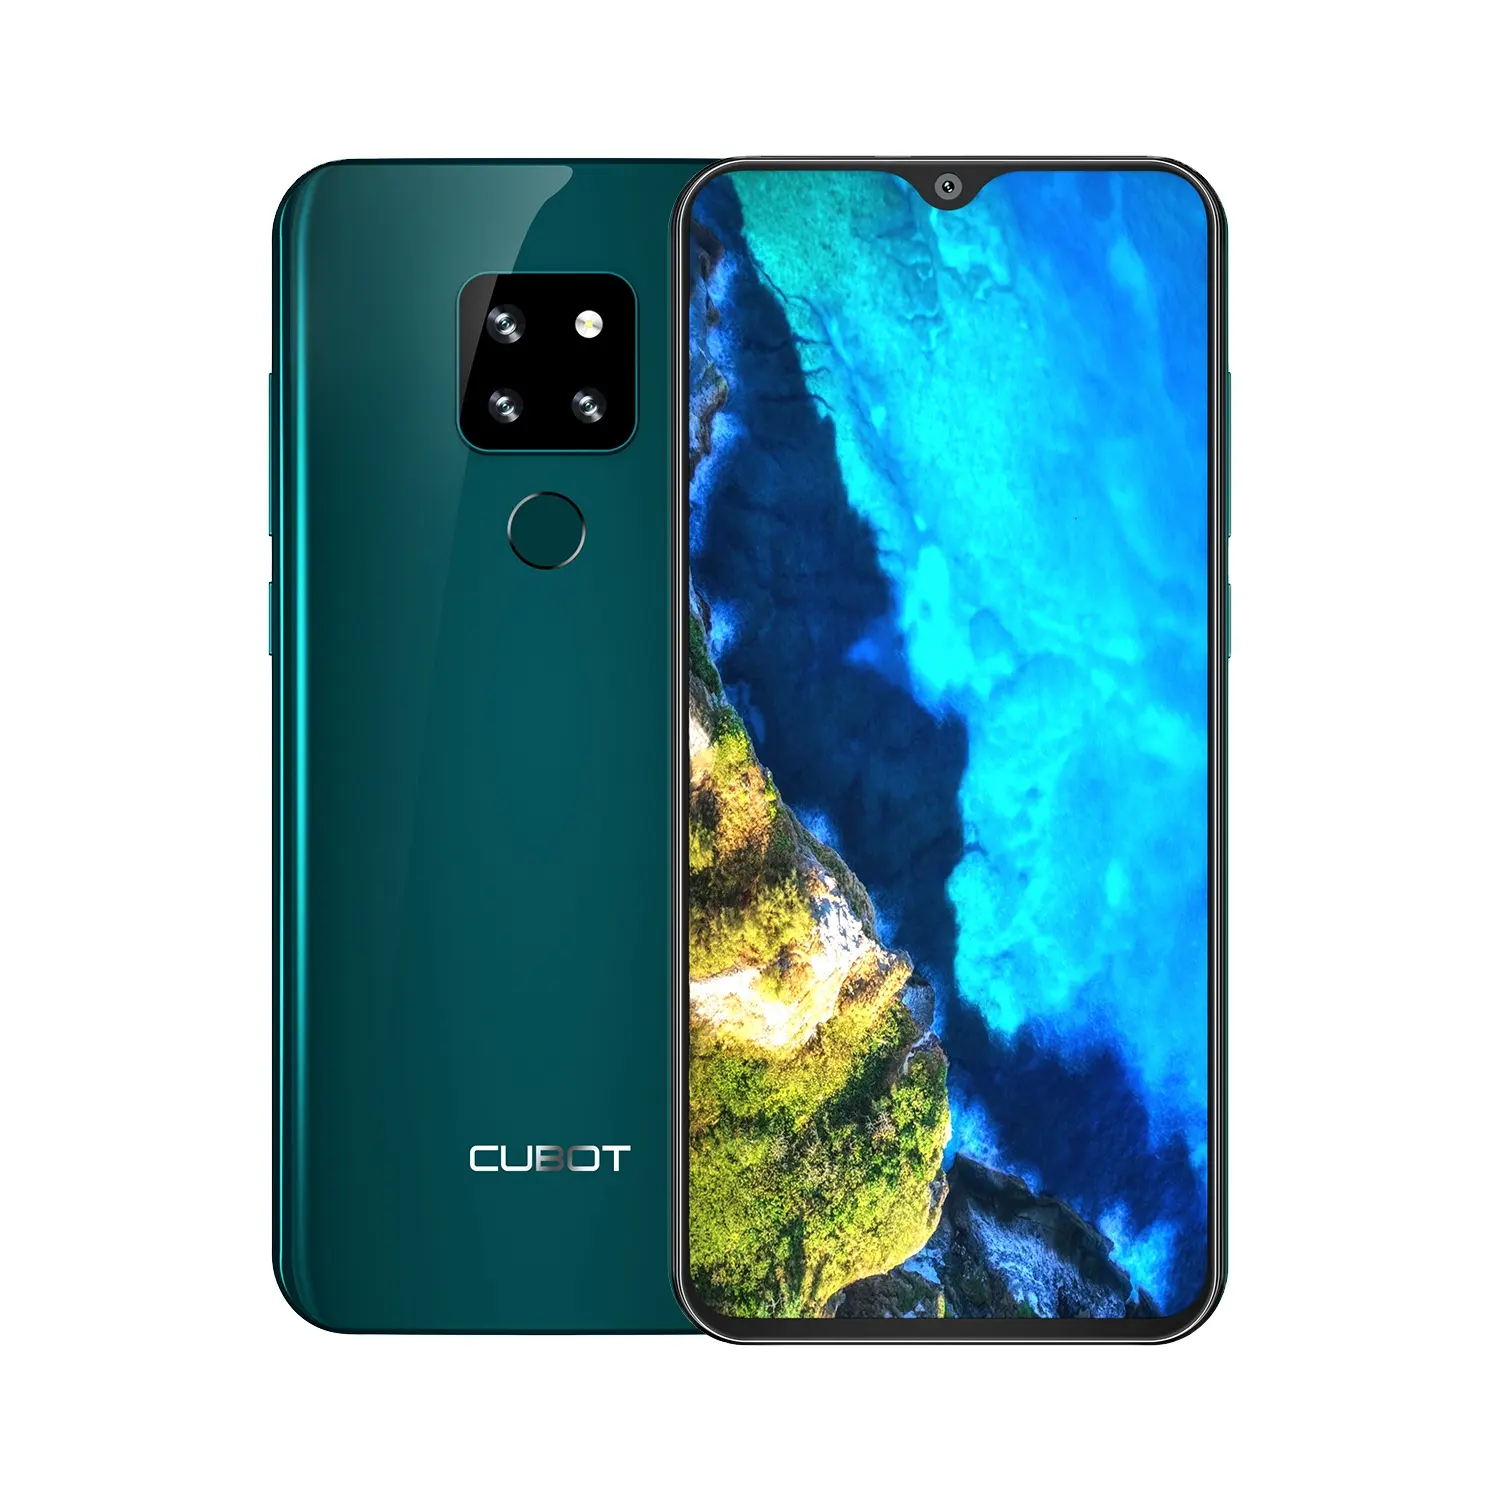 4G LTE CUBOT P30 Octa core 64GB ROM 6.3inch Waterdrop Screen android 9.0 Mobile Phone